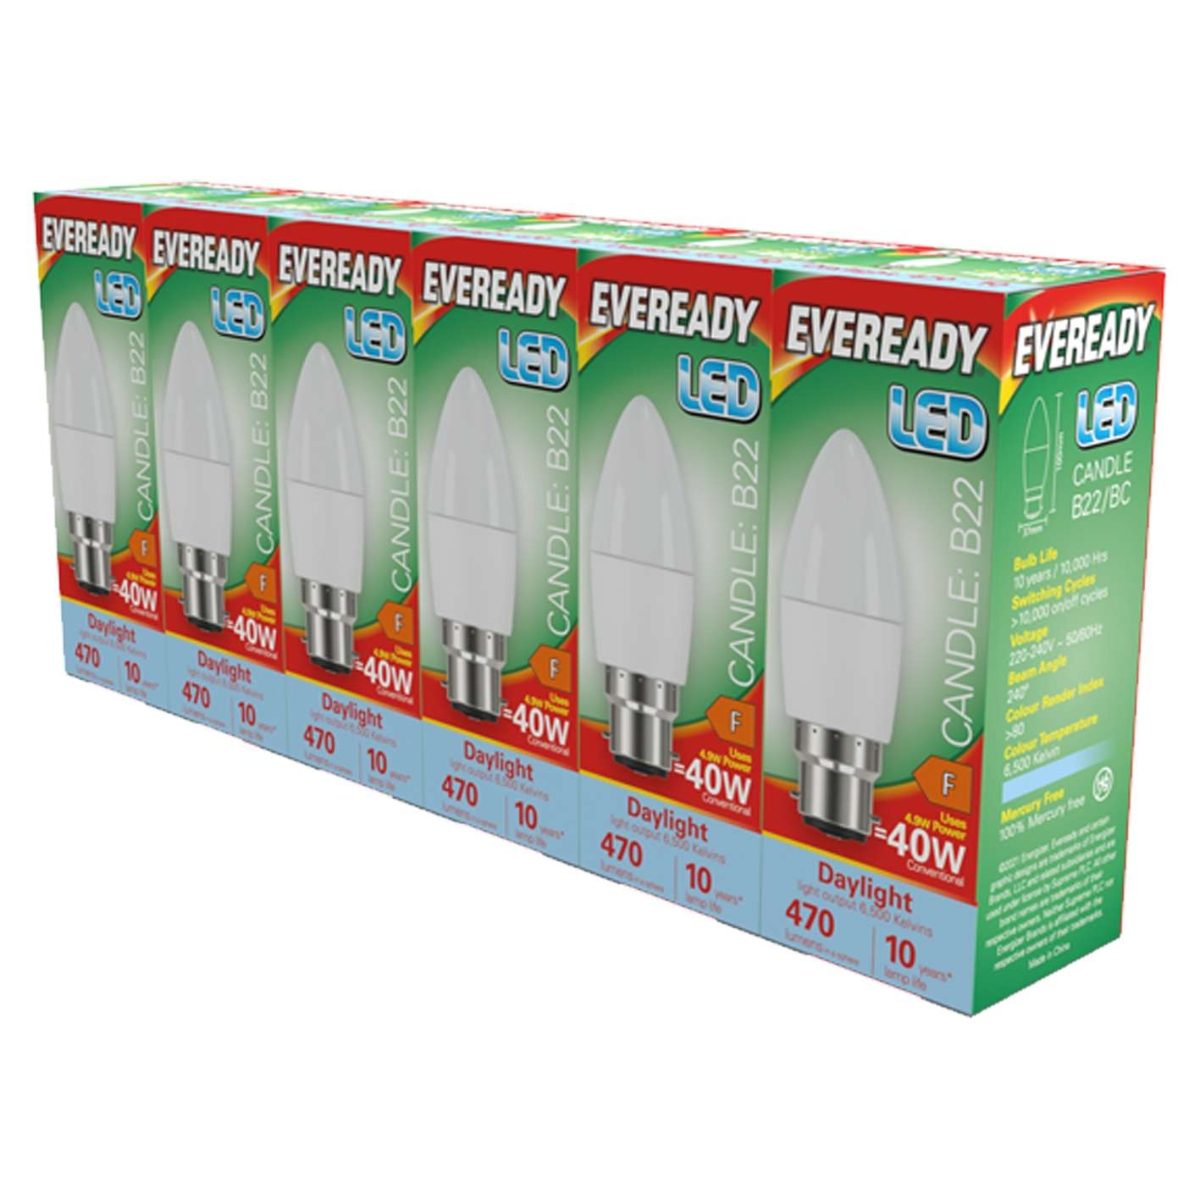 Eveready LED Candle B22 (BC) 470lm 4.9W 6500K (Daylight) Pack of 5+1